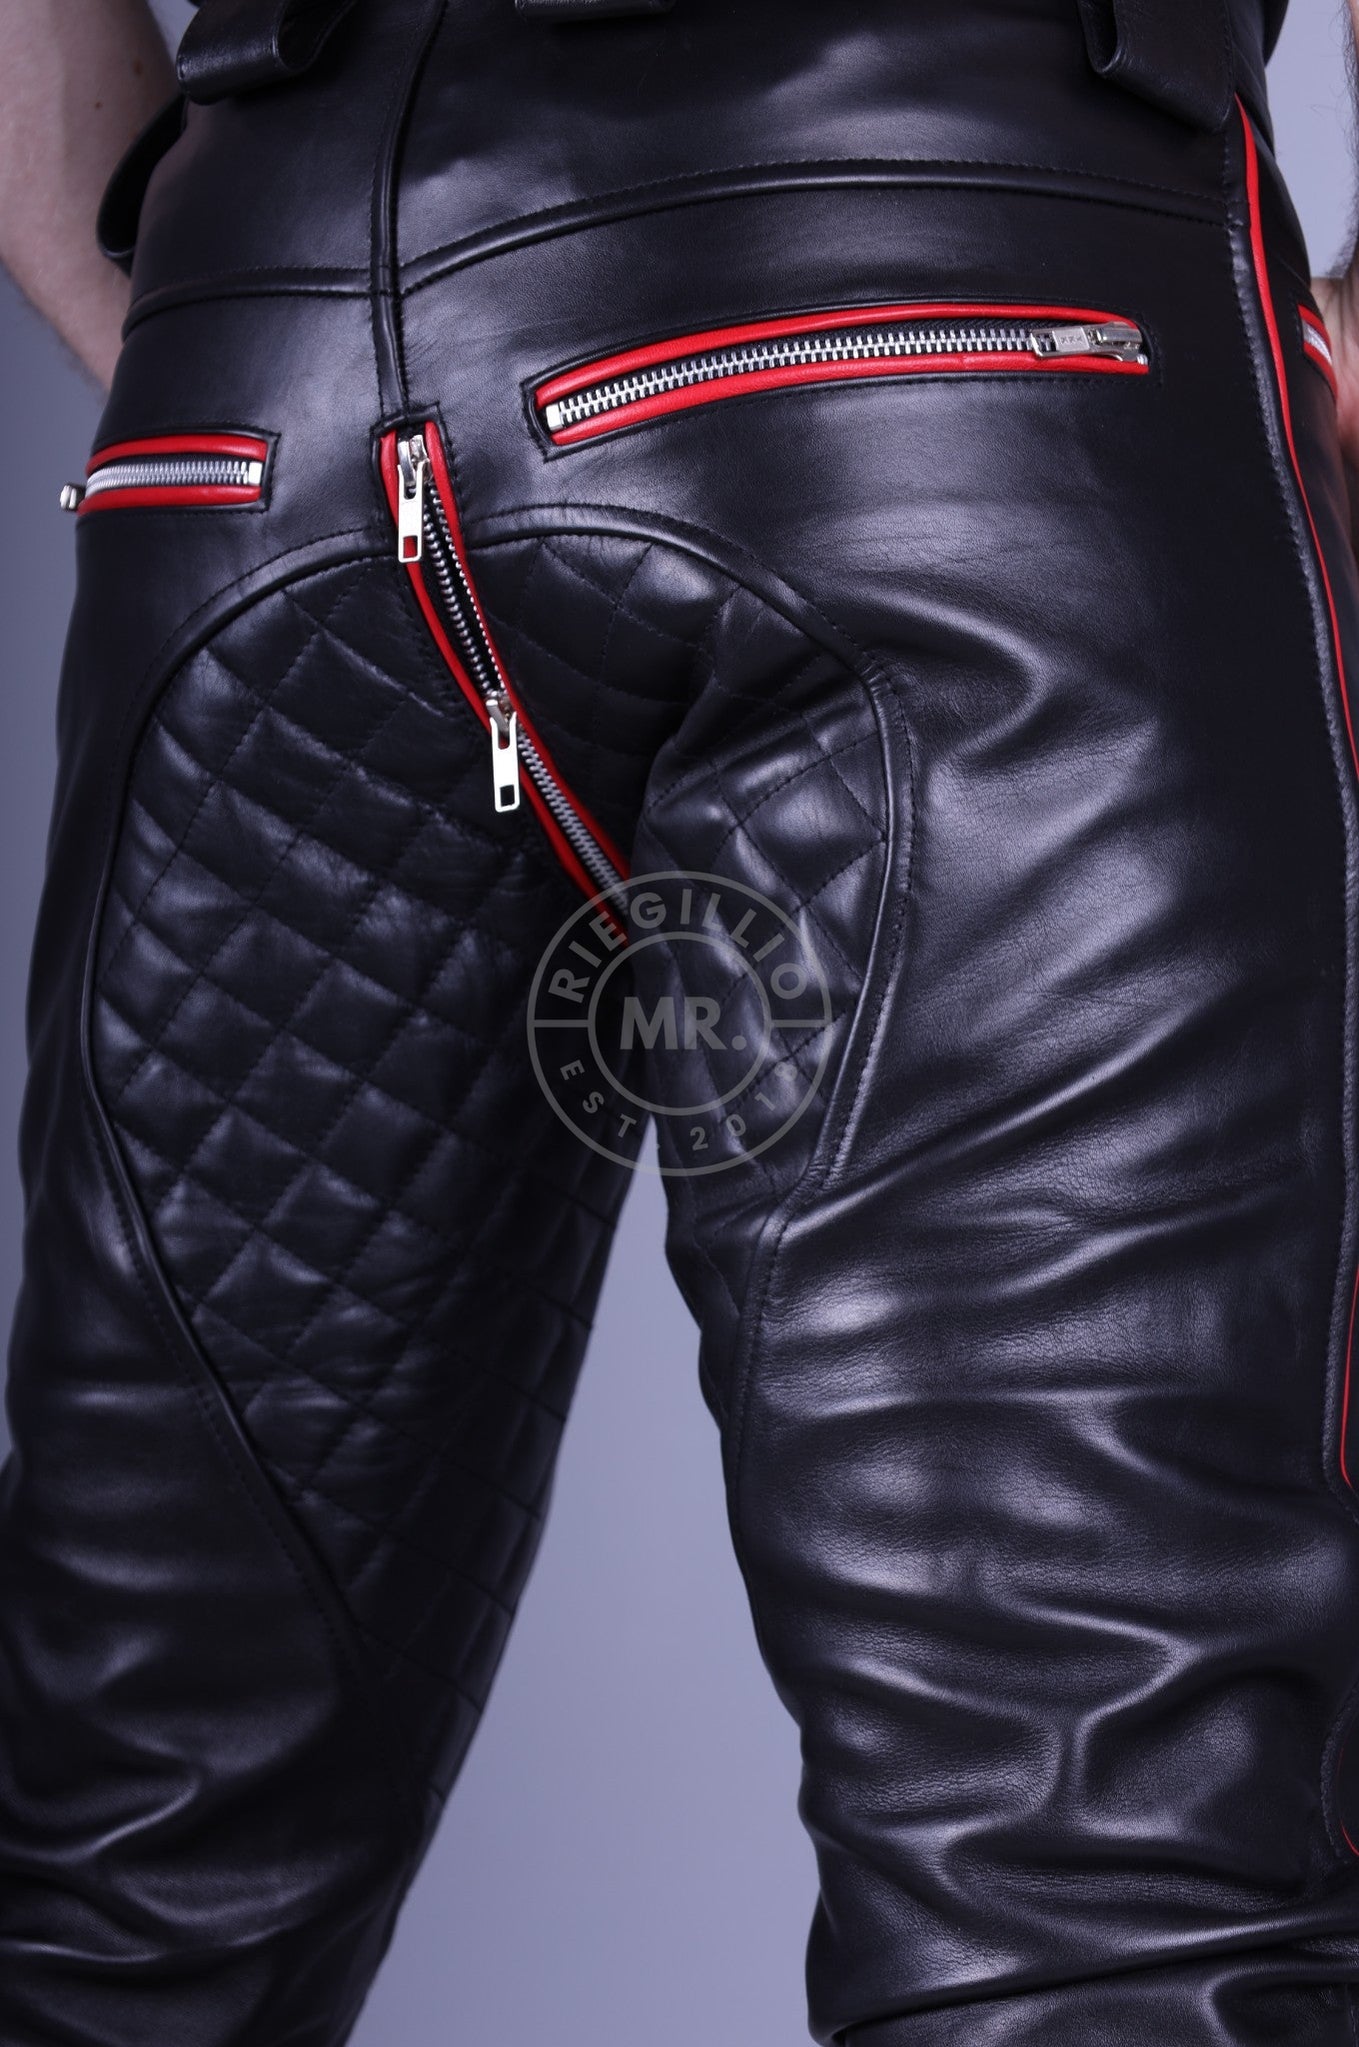 Padded Leather Pants - Red Piping-at MR. Riegillio